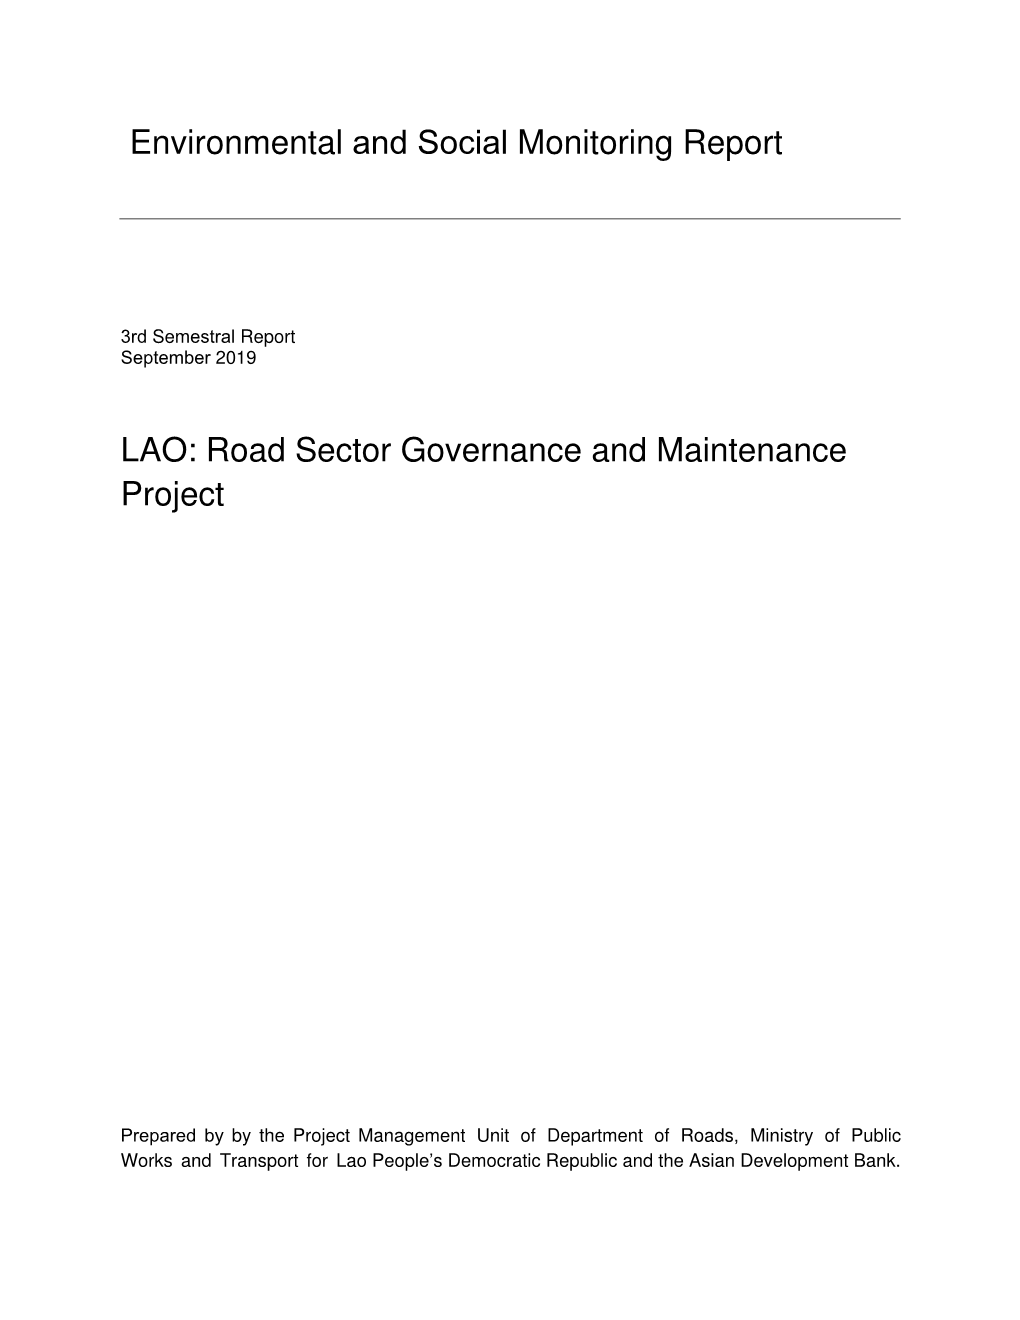 Road Sector Governance and Maintenance Project: Environmental